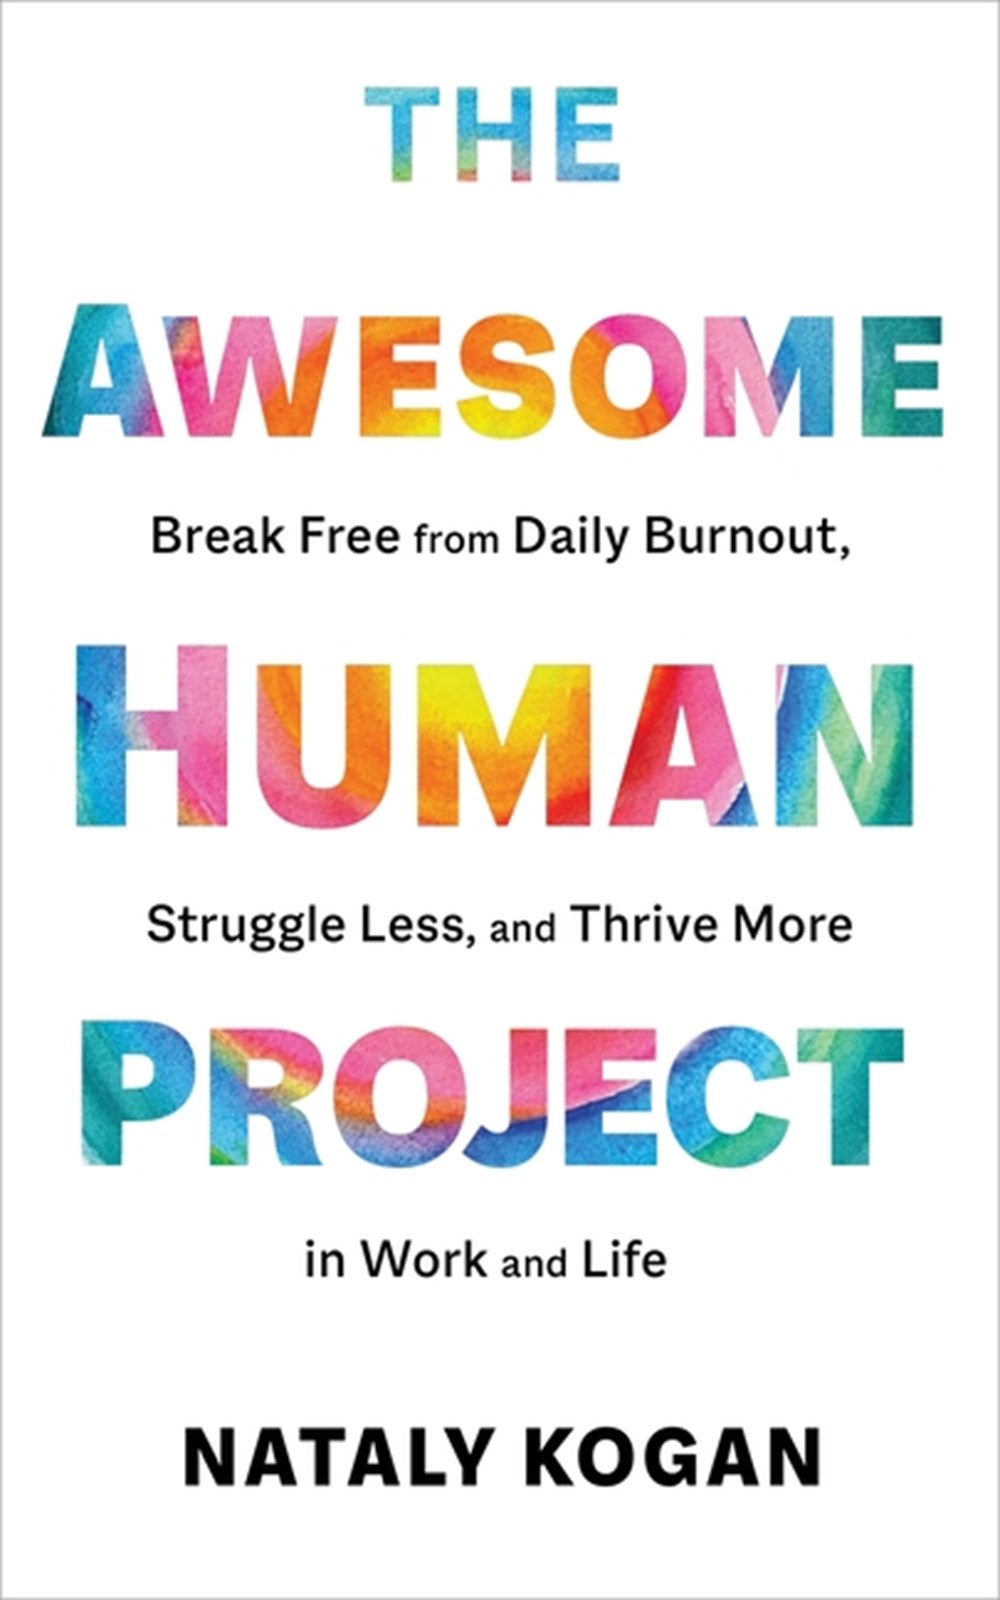 Awesome Human Project Break Free from Daily Burnout, Struggle Less, and Thrive More in Work and Life